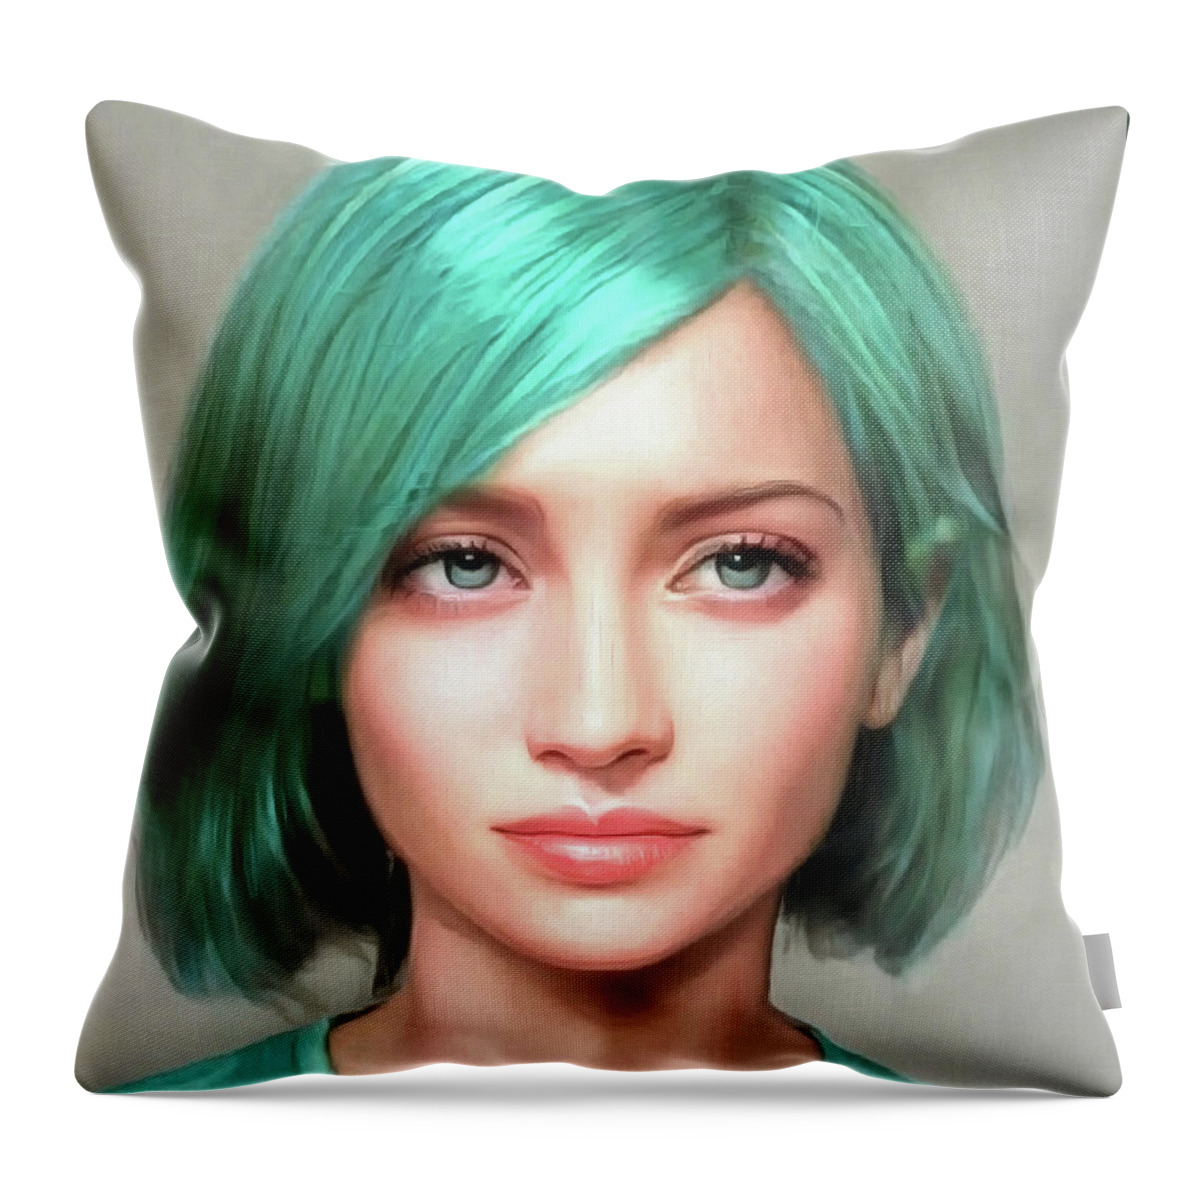 Woman Throw Pillow featuring the digital art Beautiful Woman with Green Hair Portrait 01 by Matthias Hauser